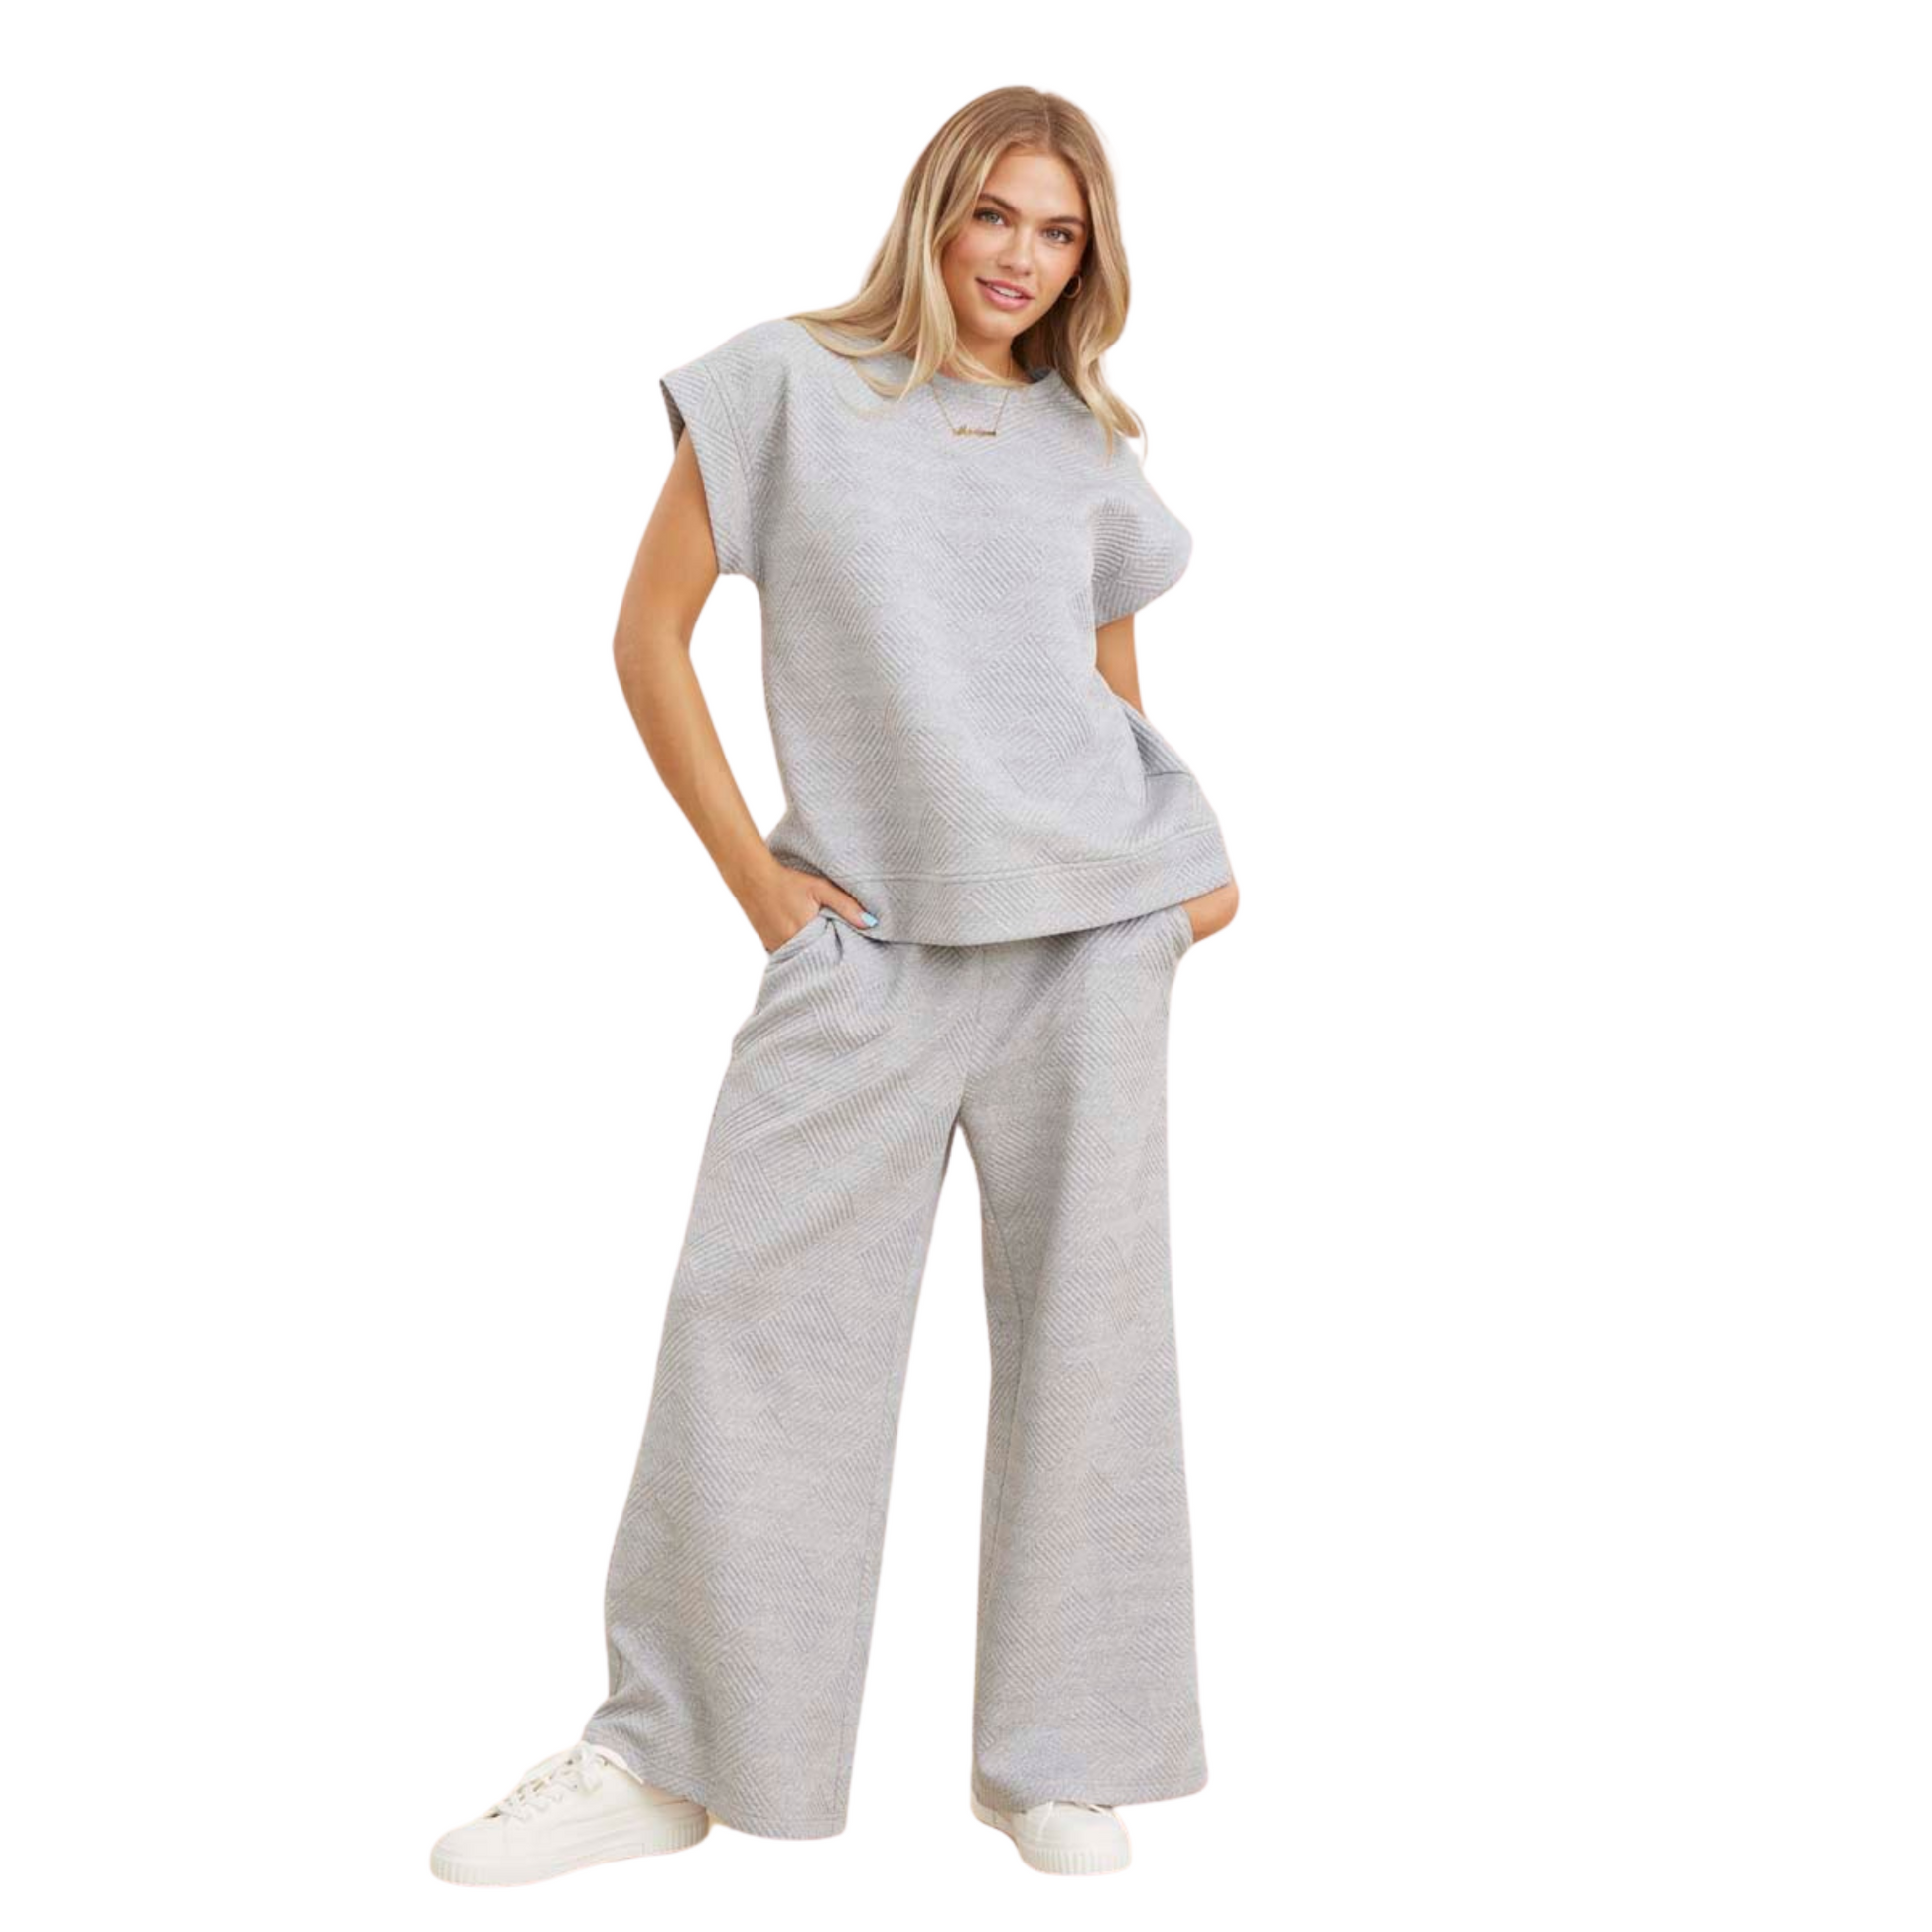 This heather grey top and bottom set features a textured U-neck top with short kimono sleeves and band hems. Made of lightweight, non-sheer fabric, this set offers comfort and style. Perfect for any occasion, a must-have for any wardrobe. Model is 5'8'' and is wearing a Small.